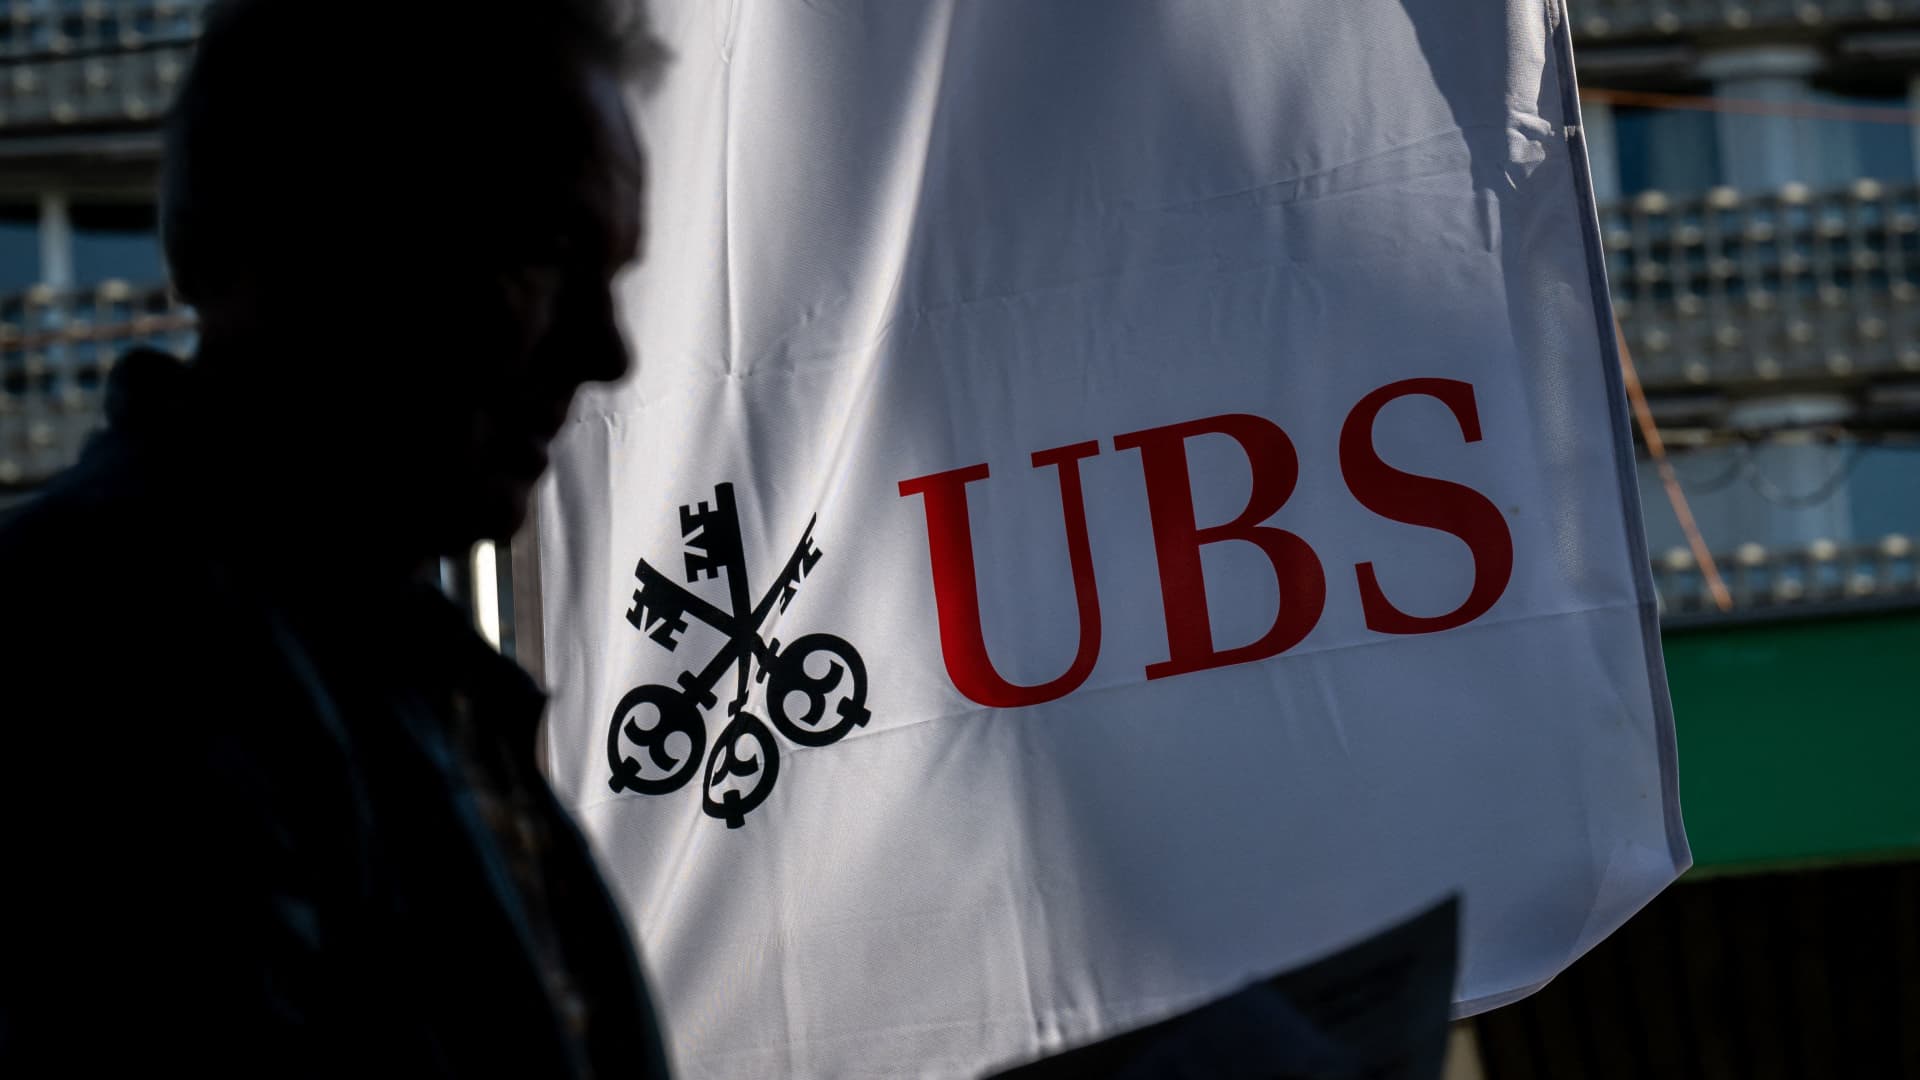 Cevian Capital takes a stake in UBS. How the activist’s track record with banks could help it build value 